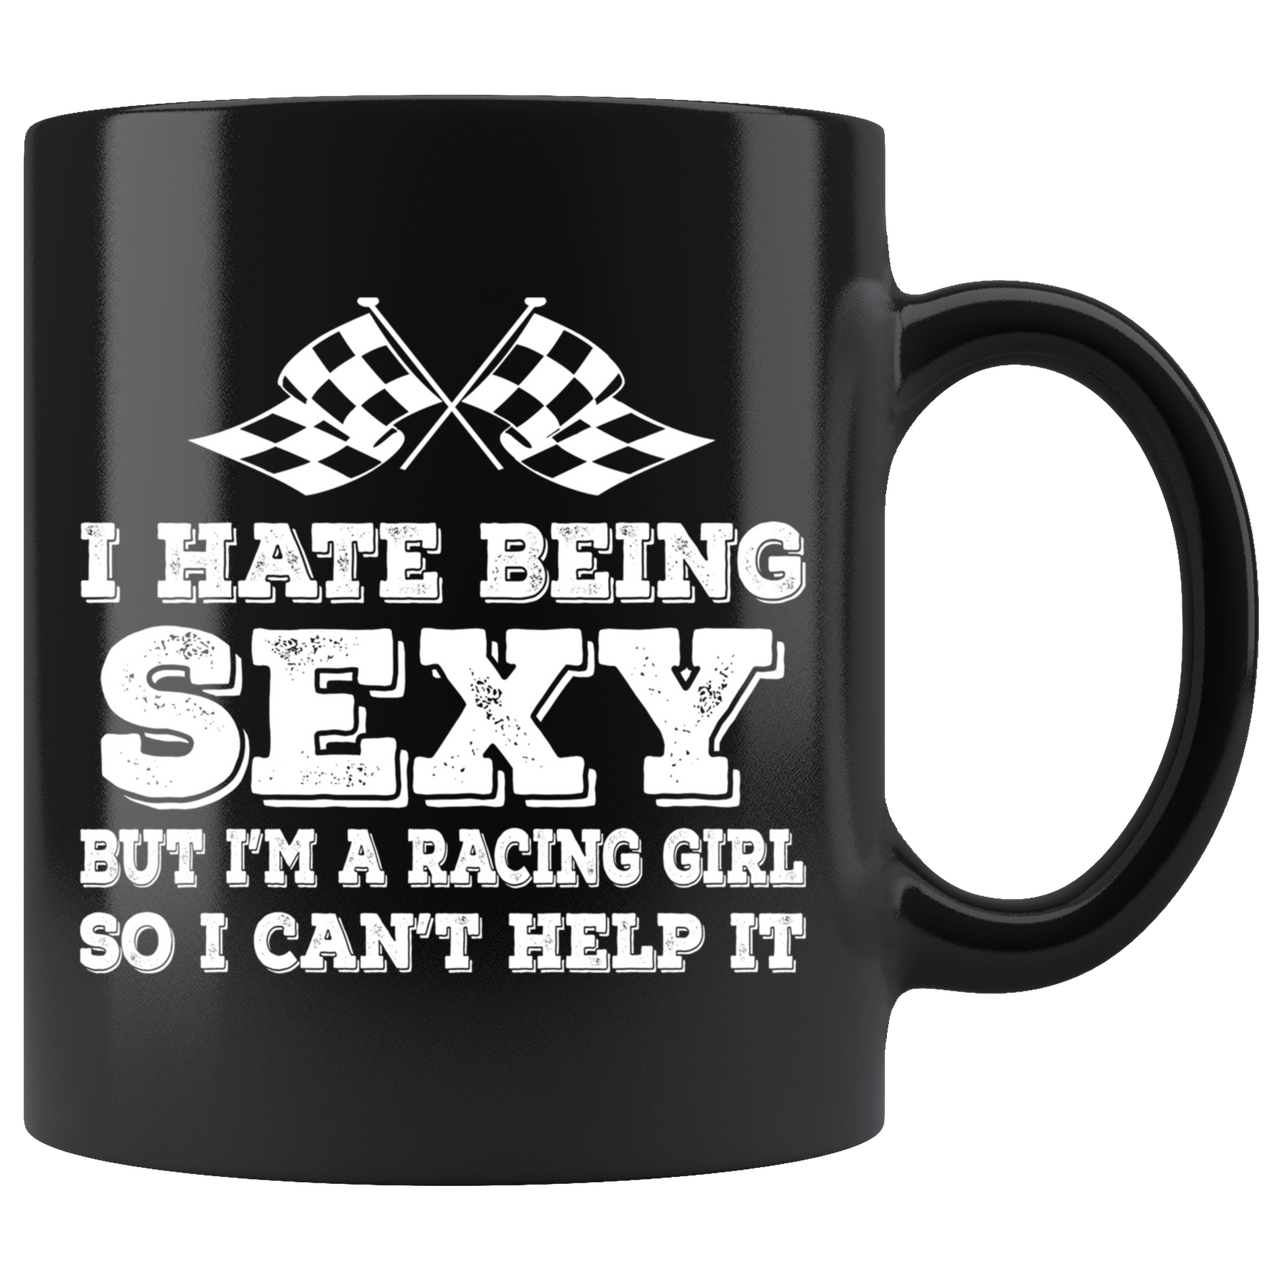 I Hate Being Sexy But I'm A Racing Girl So I Can't Help It Mug!